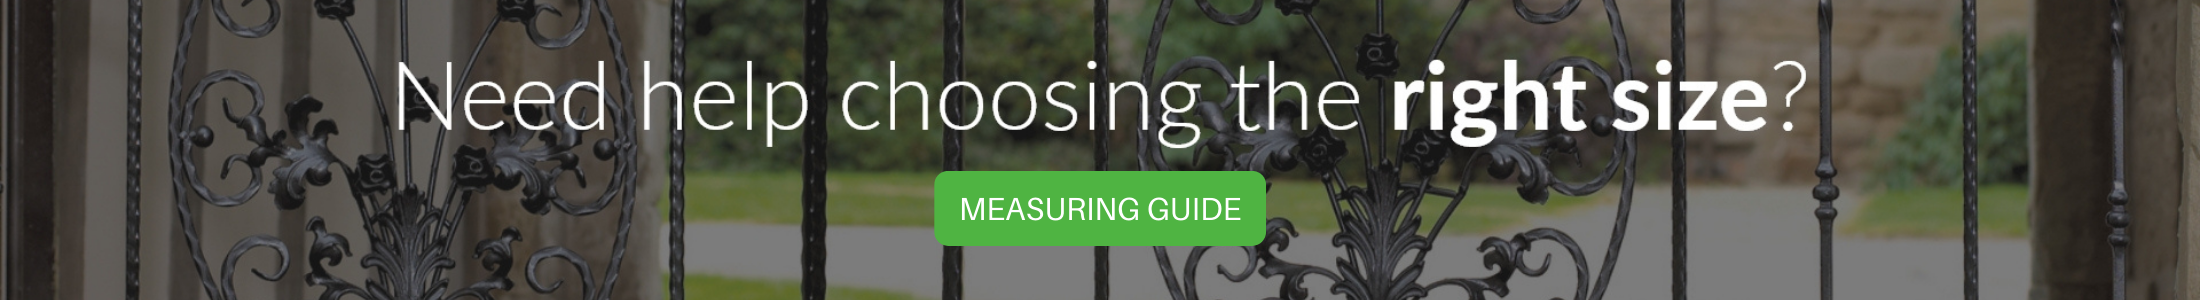 Refer to the measuring guide for help and advice